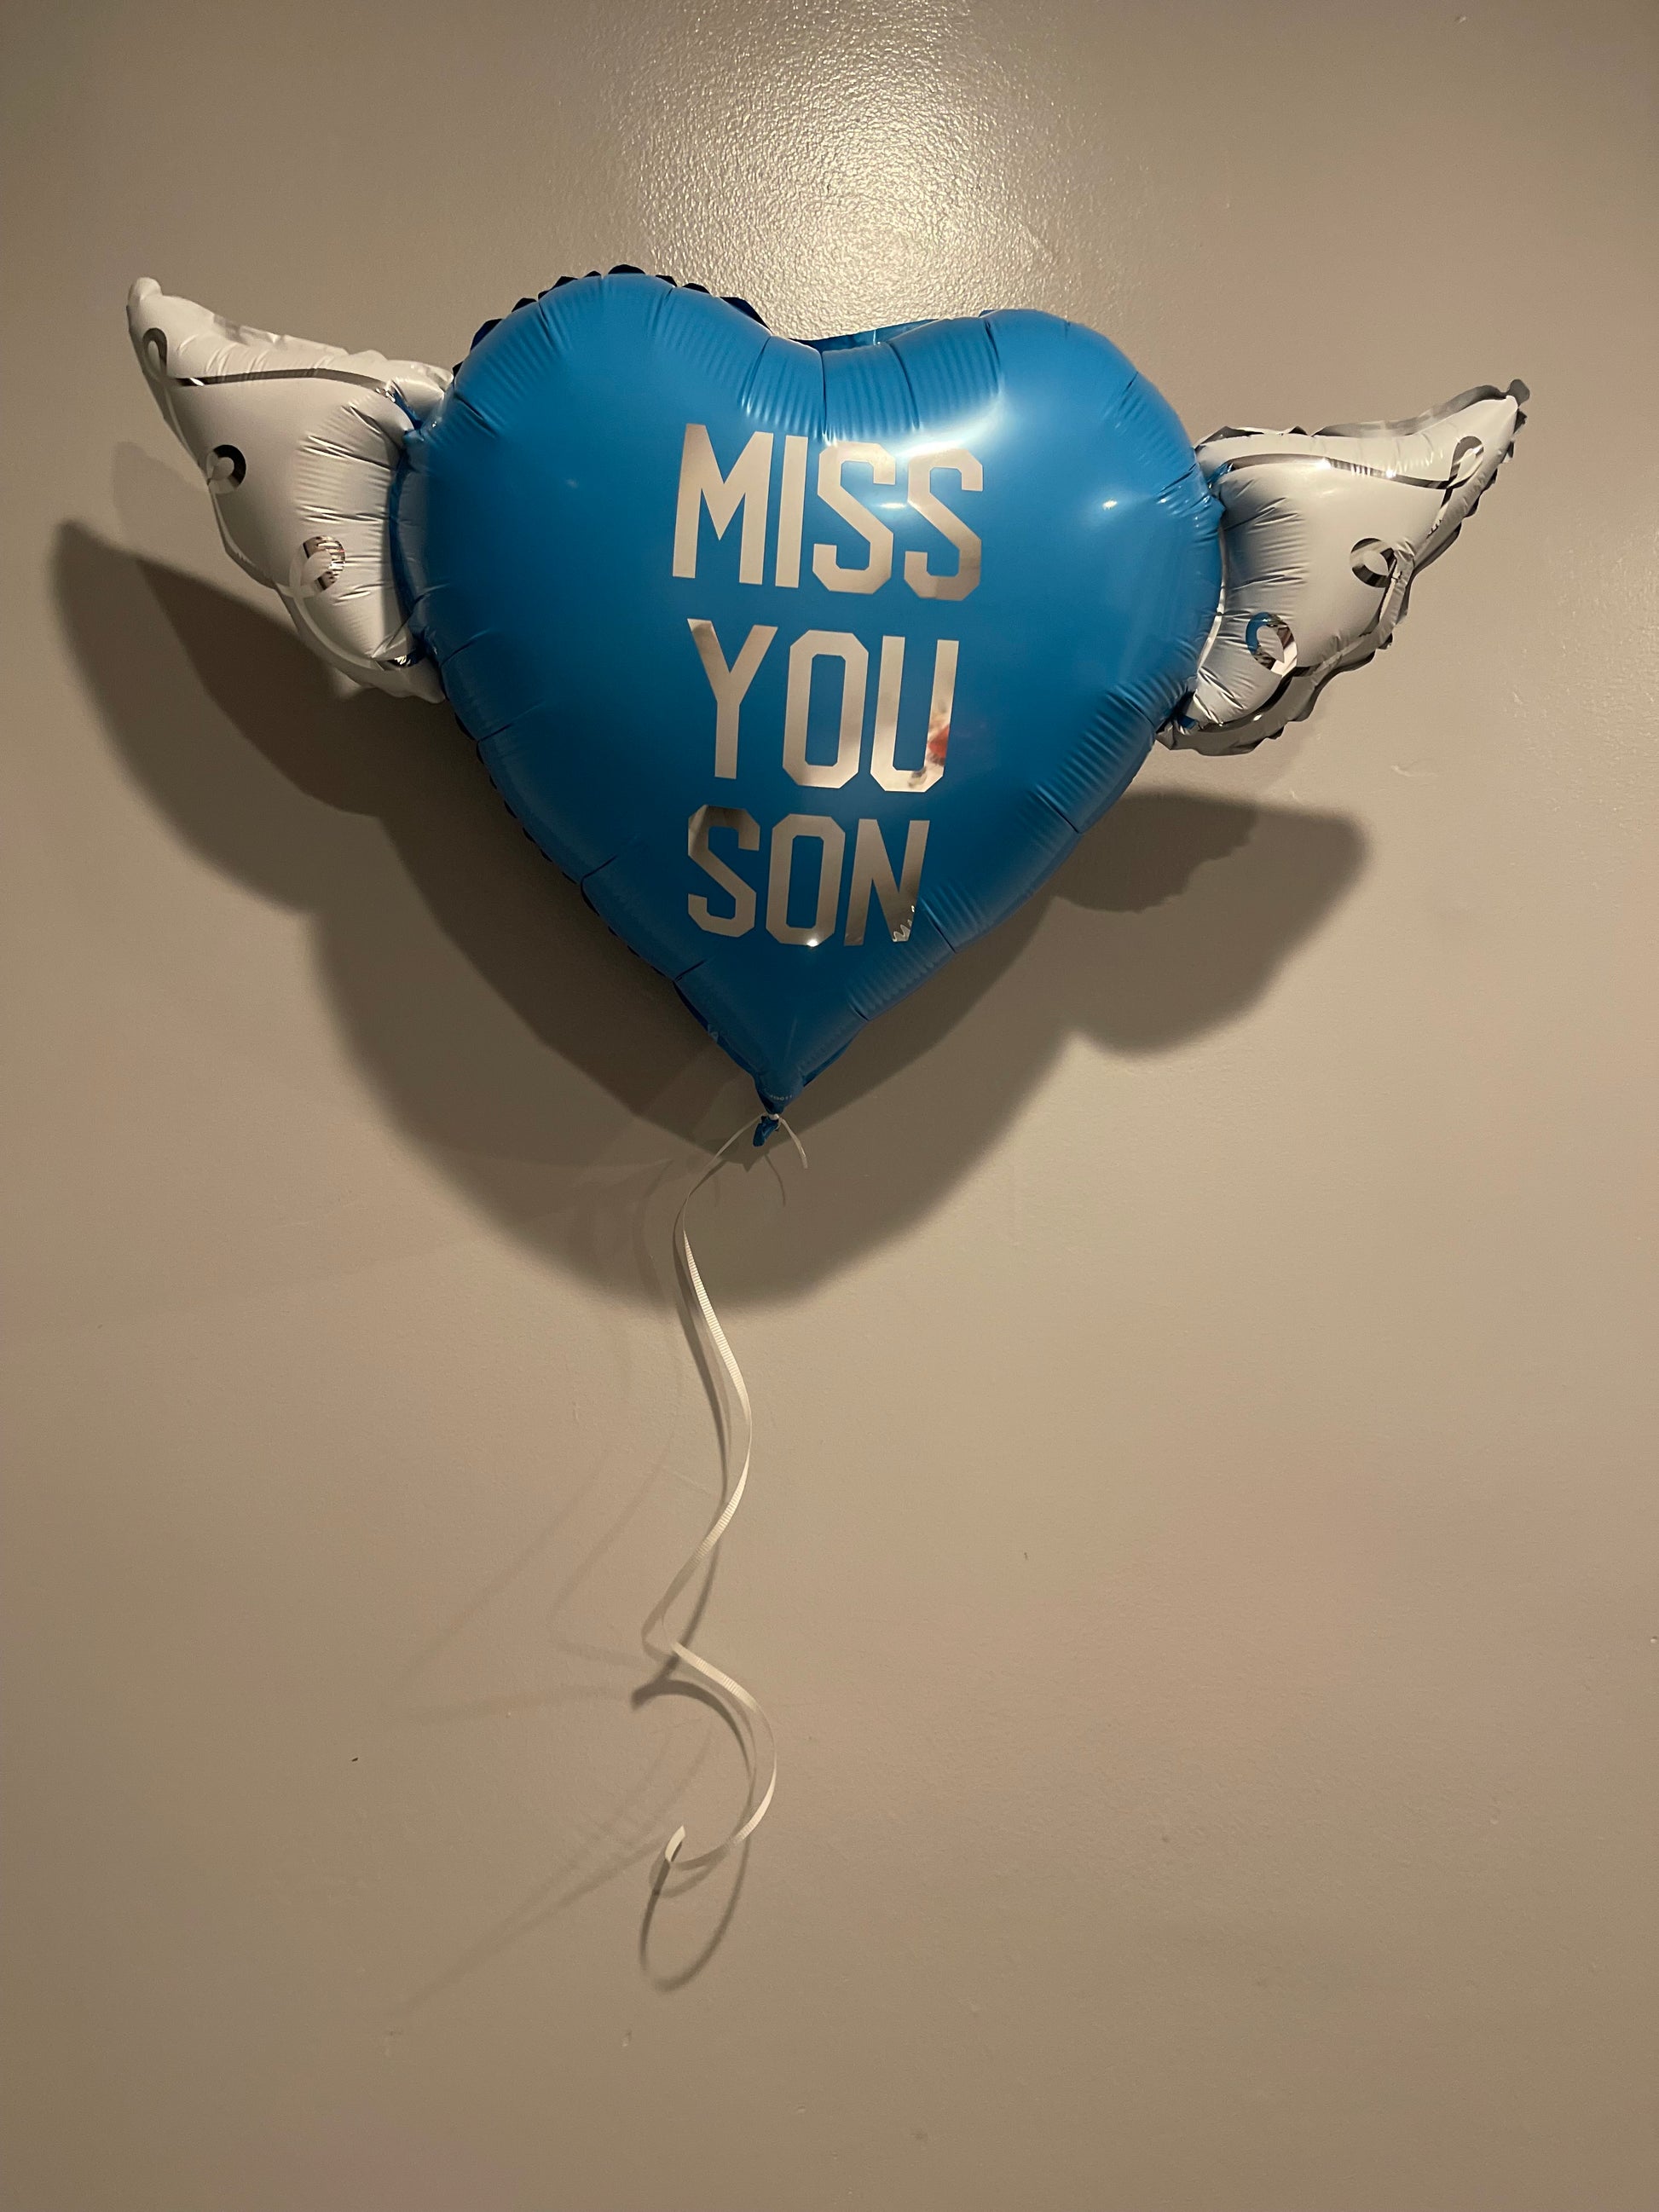 Miss You Son Heavenly Balloons ™ Heart Shaped with angel wings (Blue)